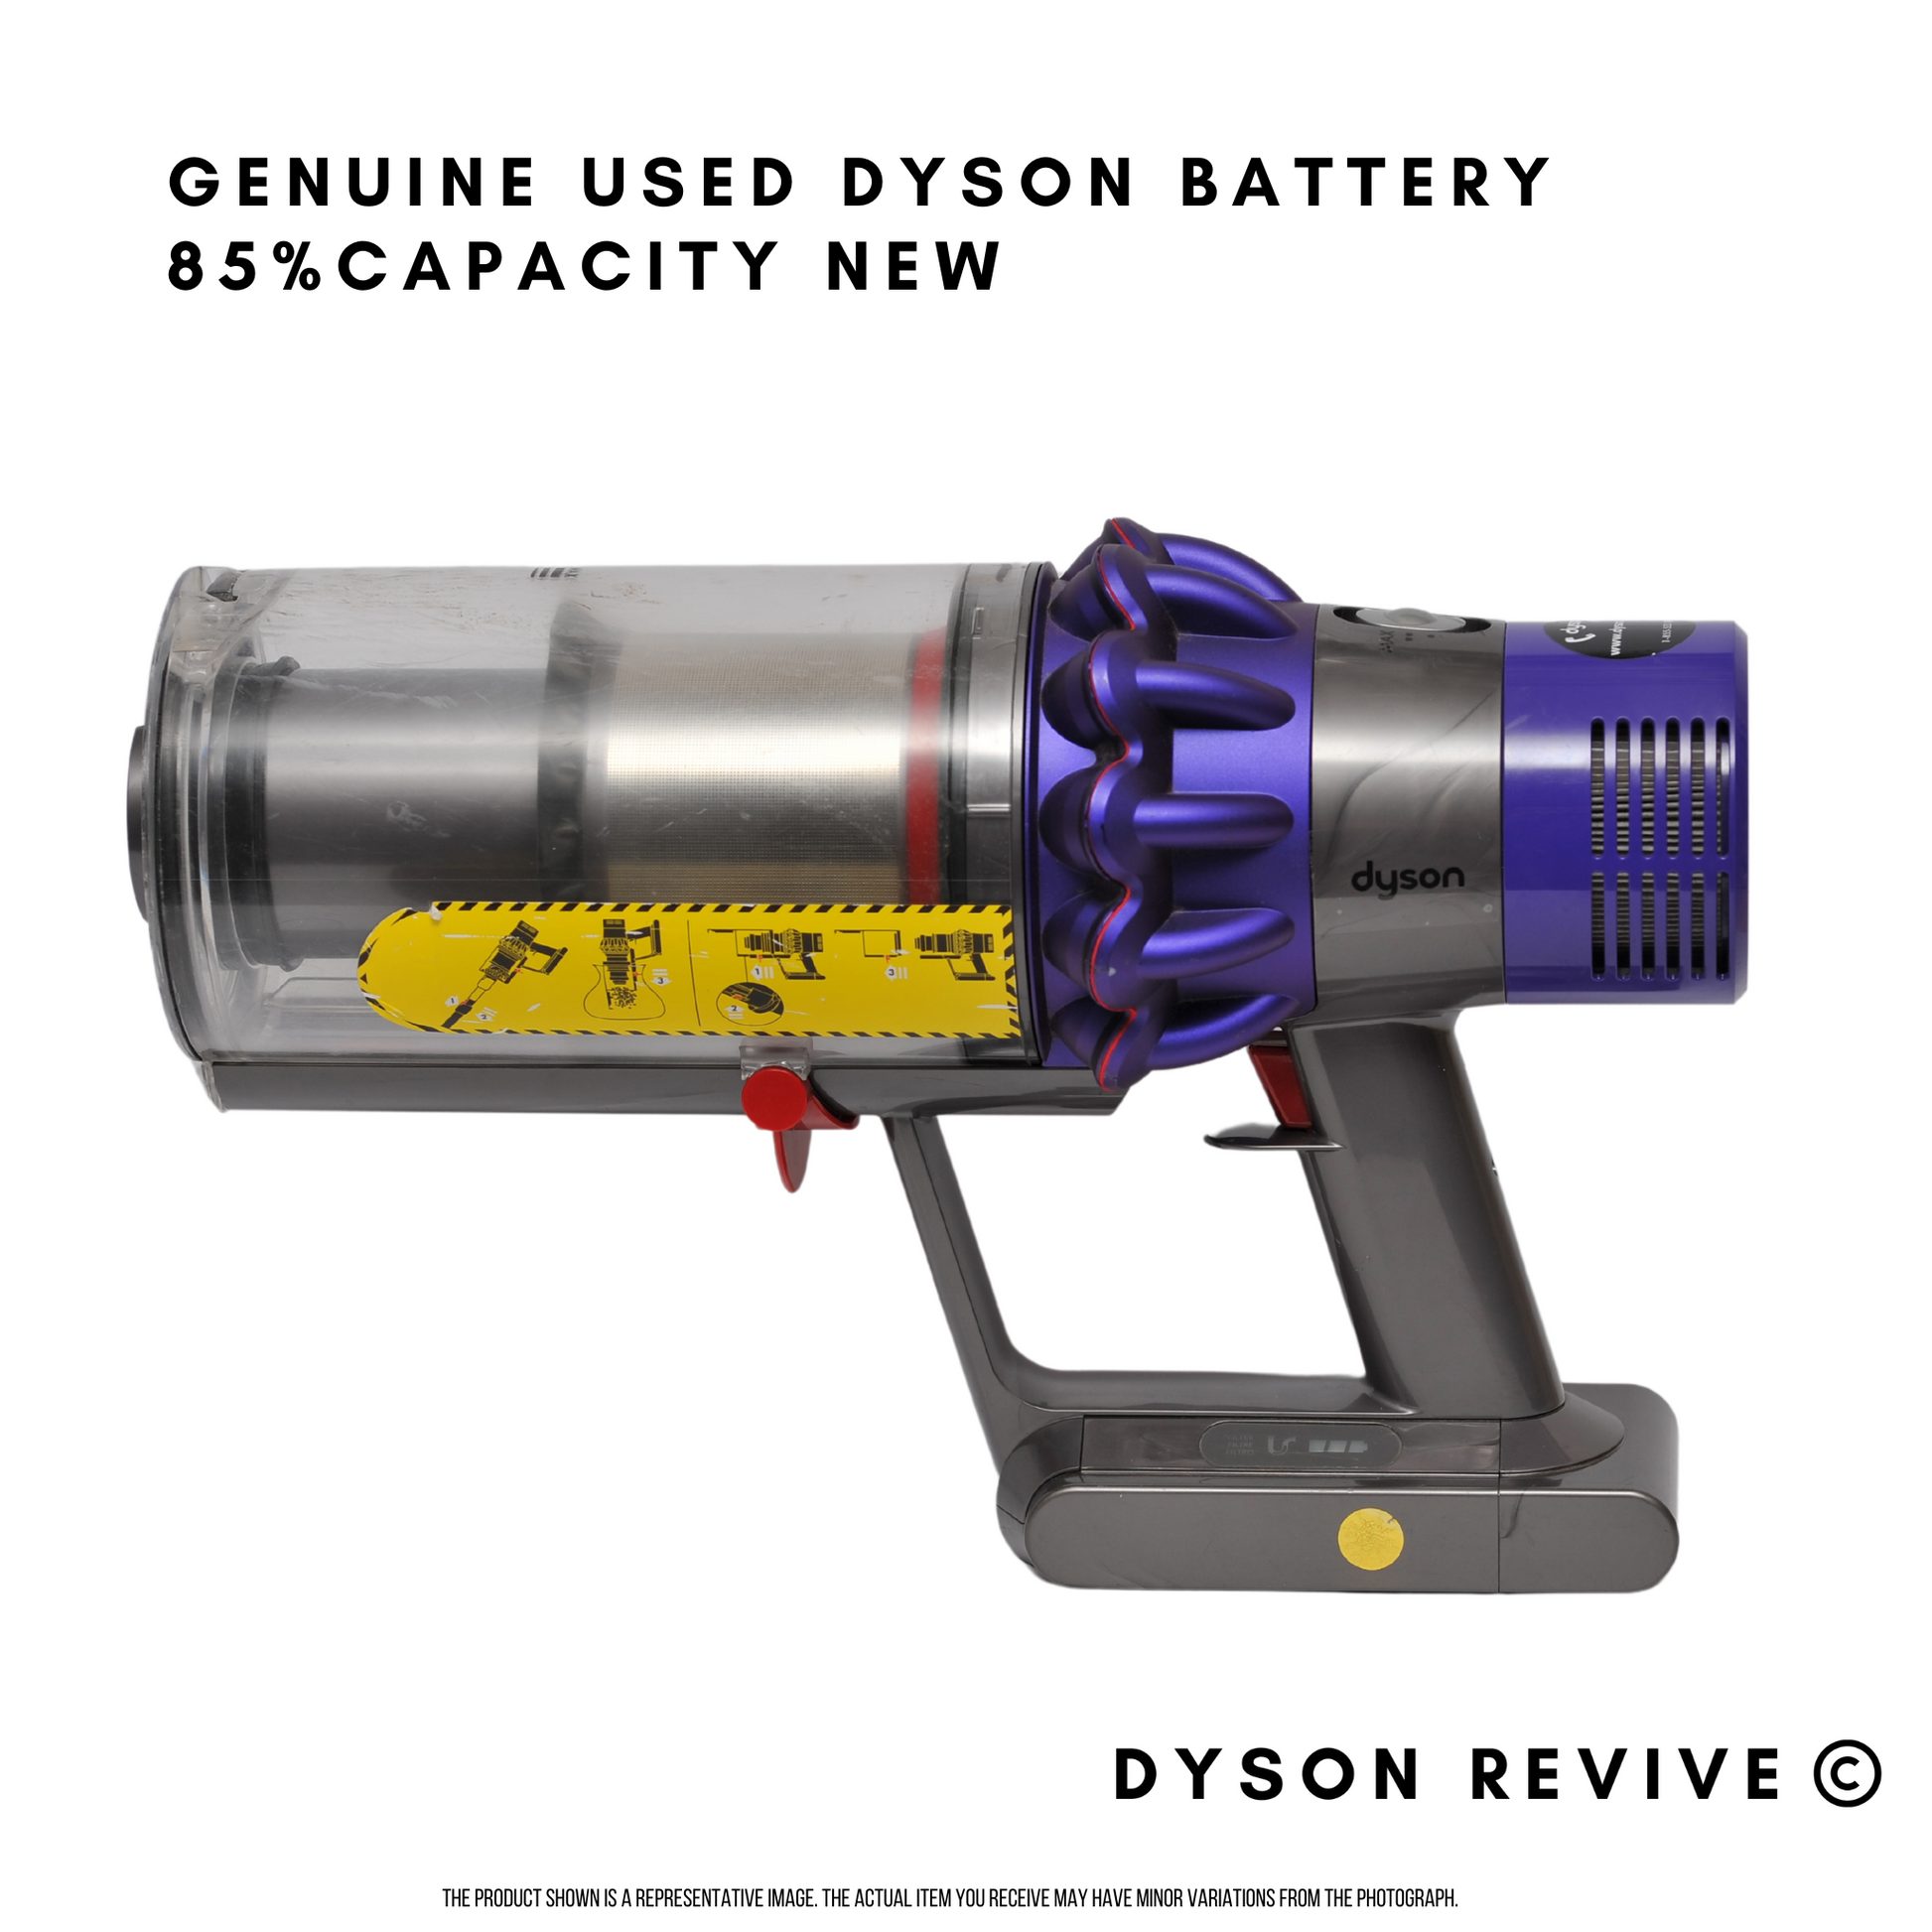 Genuine Dyson Refurbished V10 Main Body With Used Genuine Dyson Battery Vacuum Cleaner - Dyson Revive